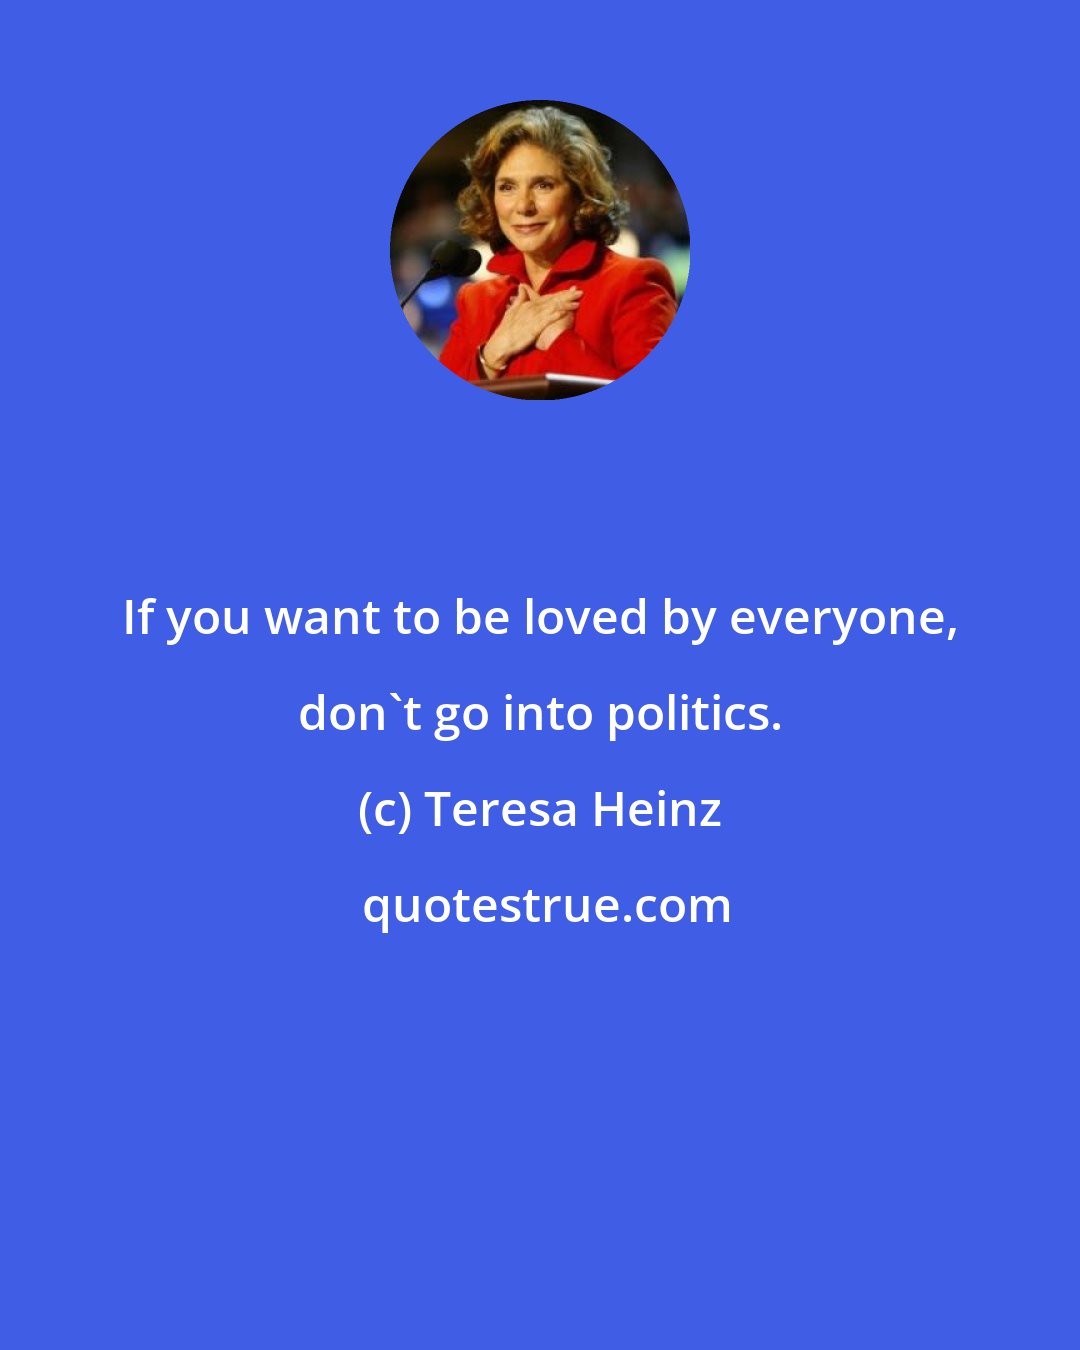 Teresa Heinz: If you want to be loved by everyone, don't go into politics.